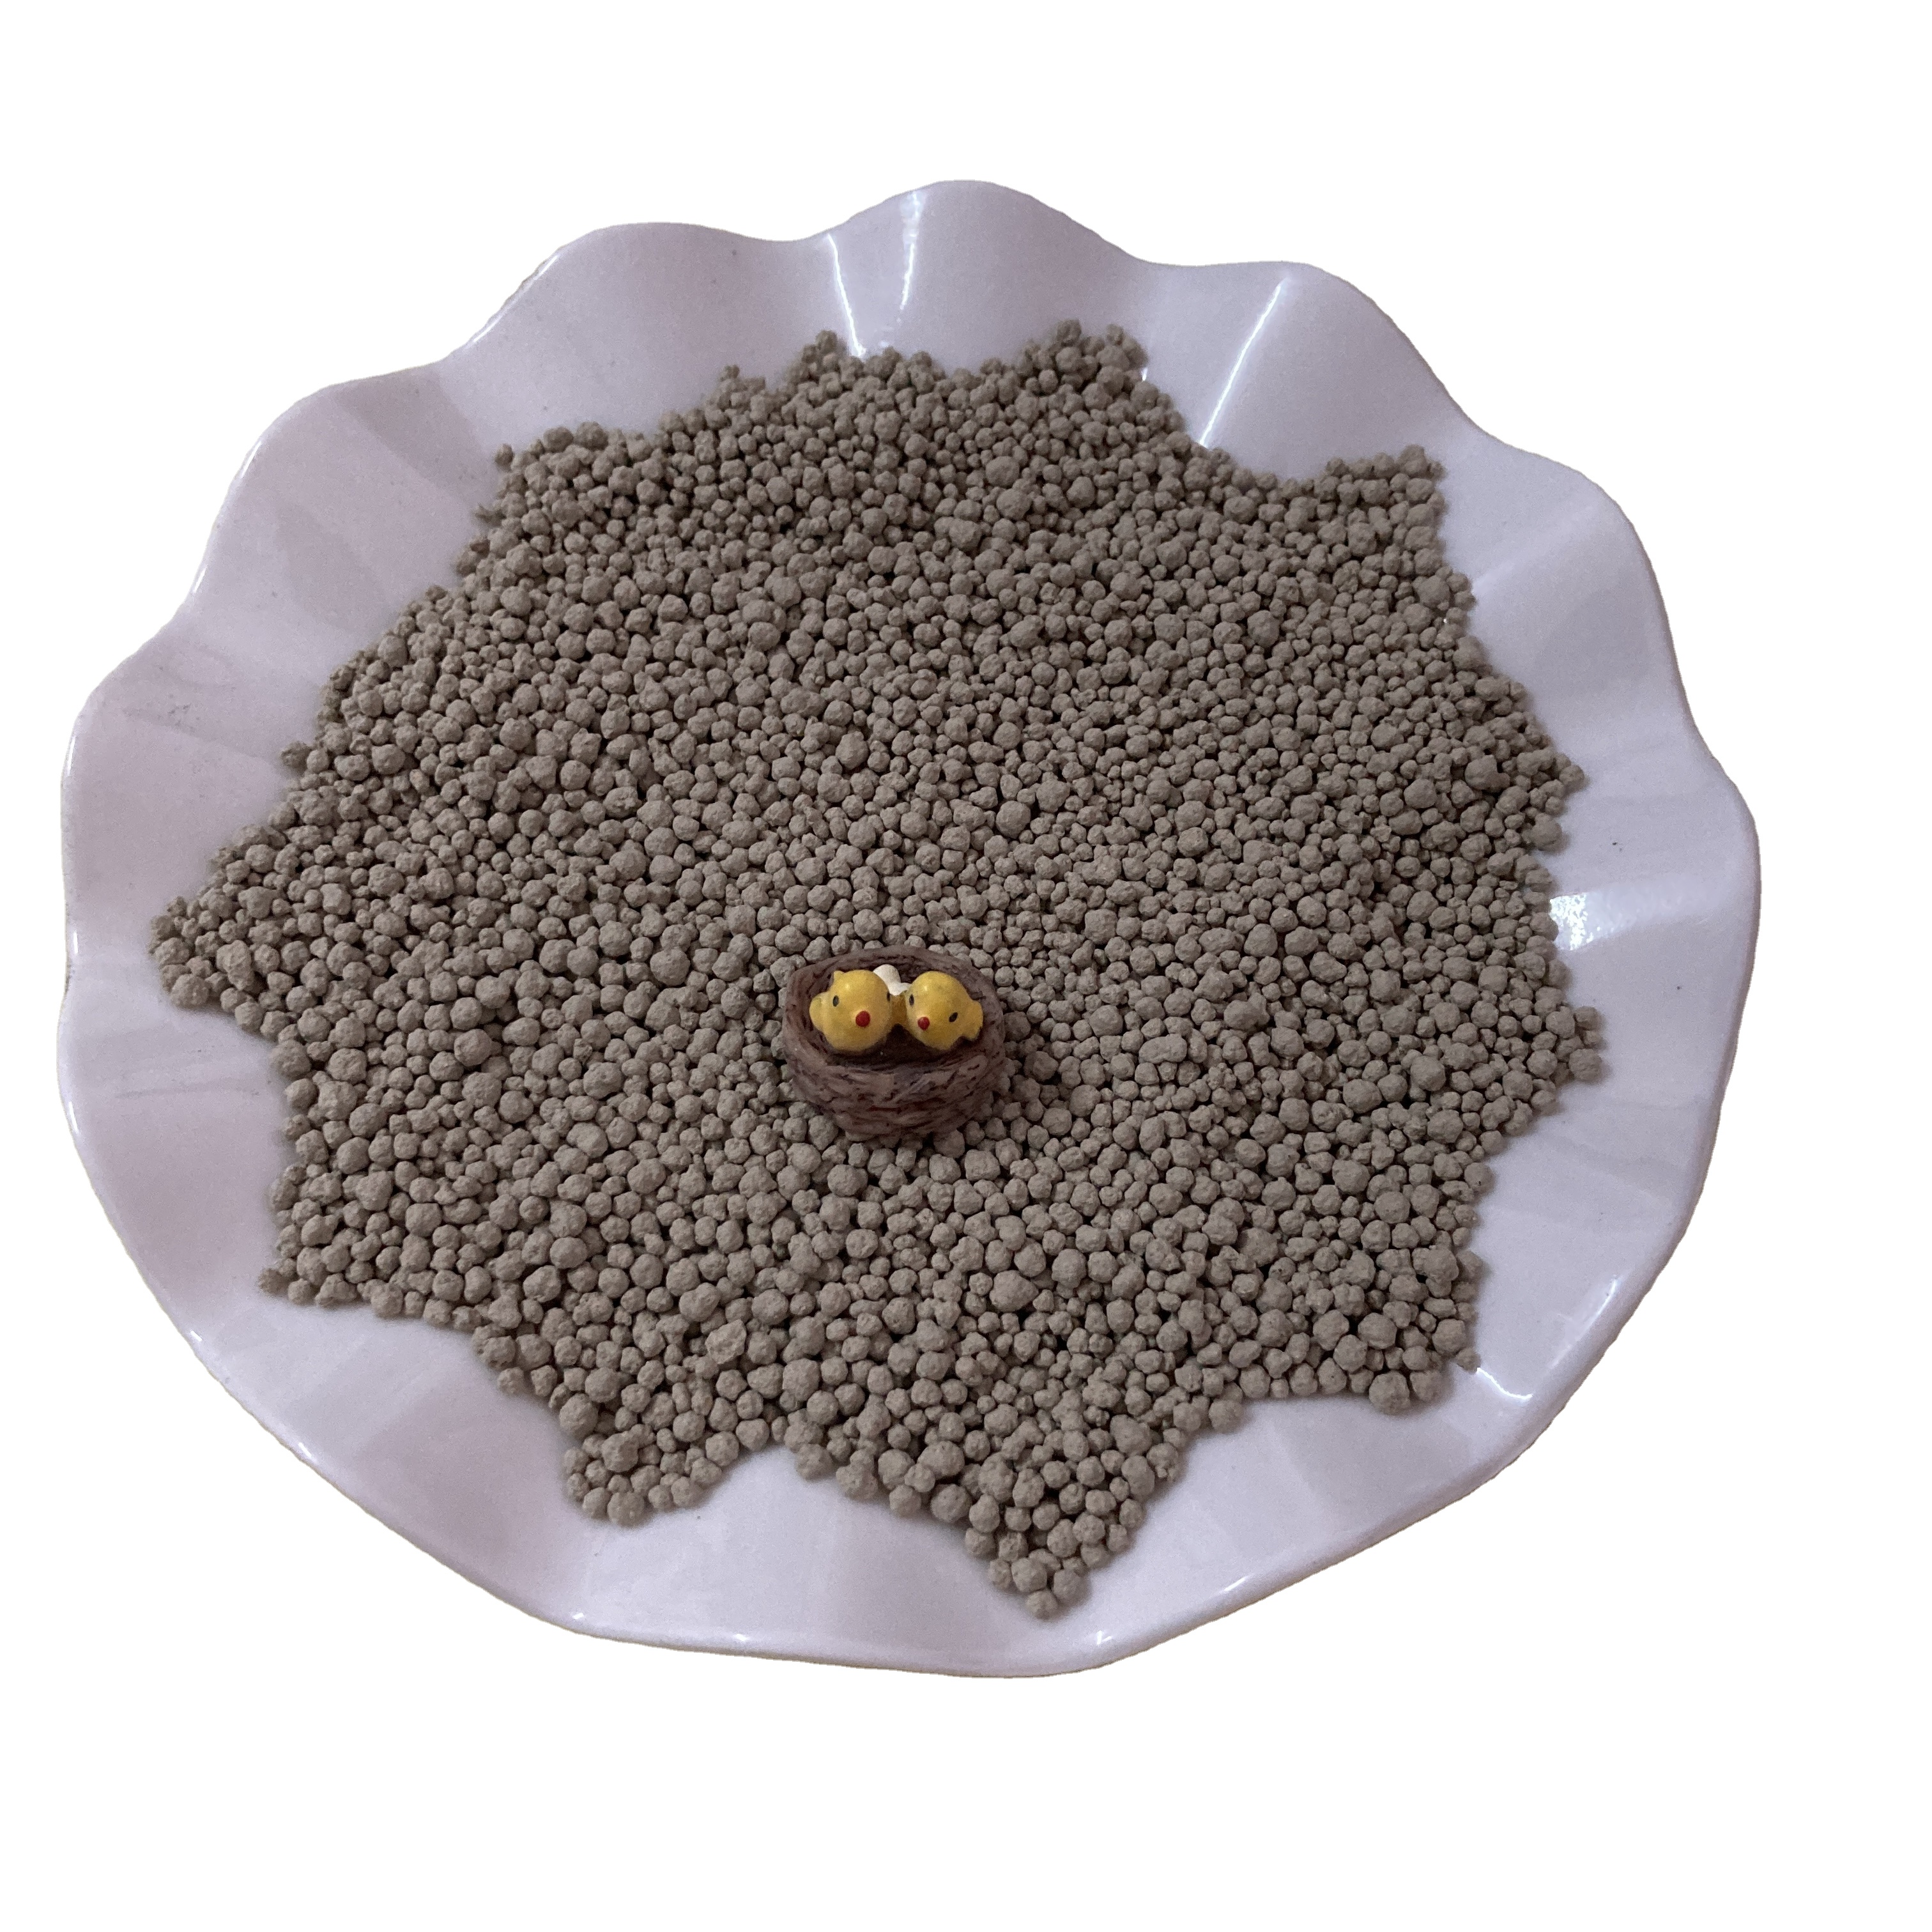 eco clean premium clumping clay deodorizer ball shaped cat silicon litter toilet plant rocks